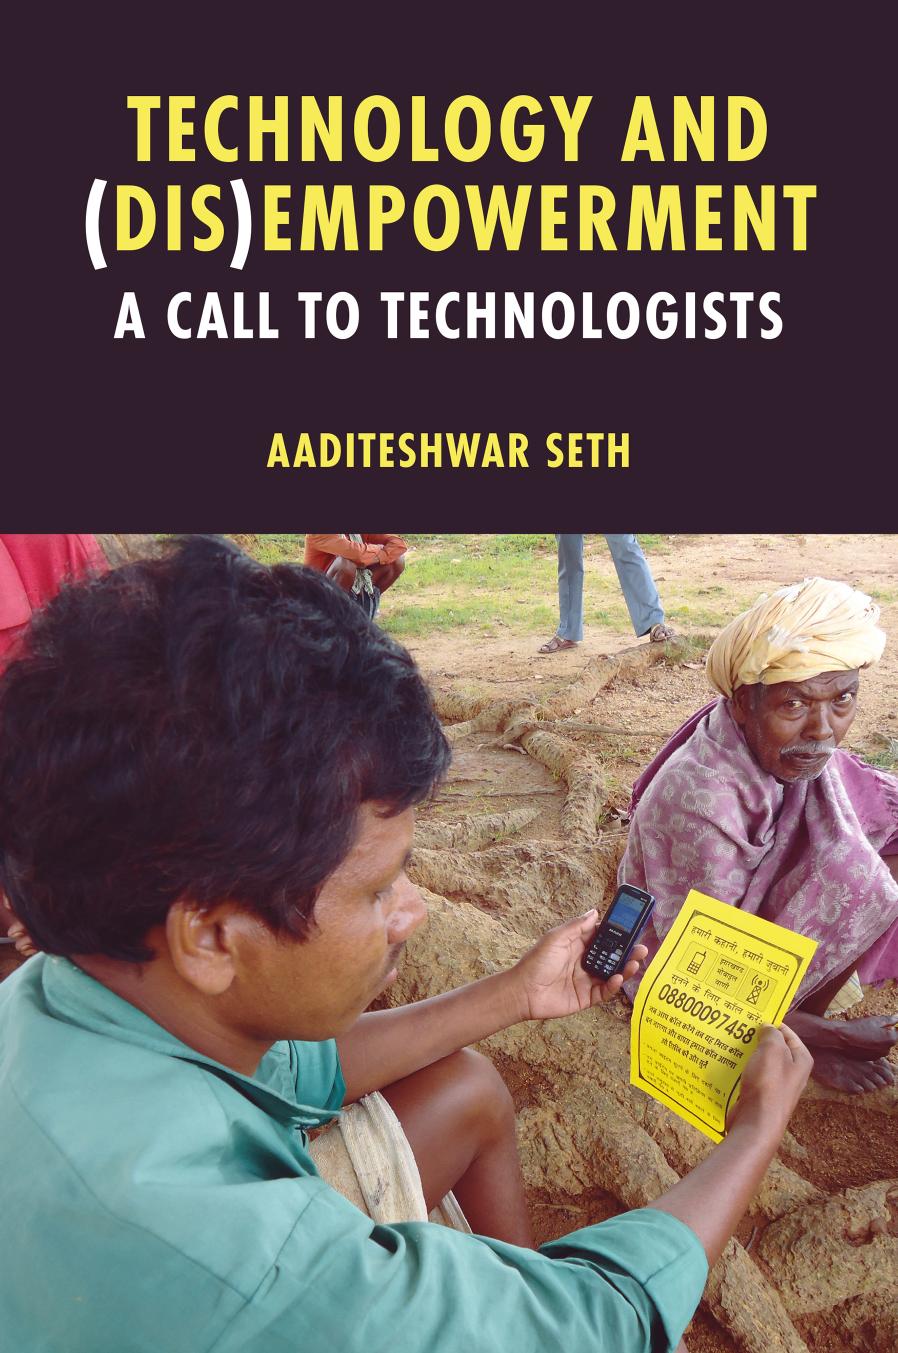 Technology and (Dis)Empowerment: A Call to Technologists by Aaditeshwar Seth